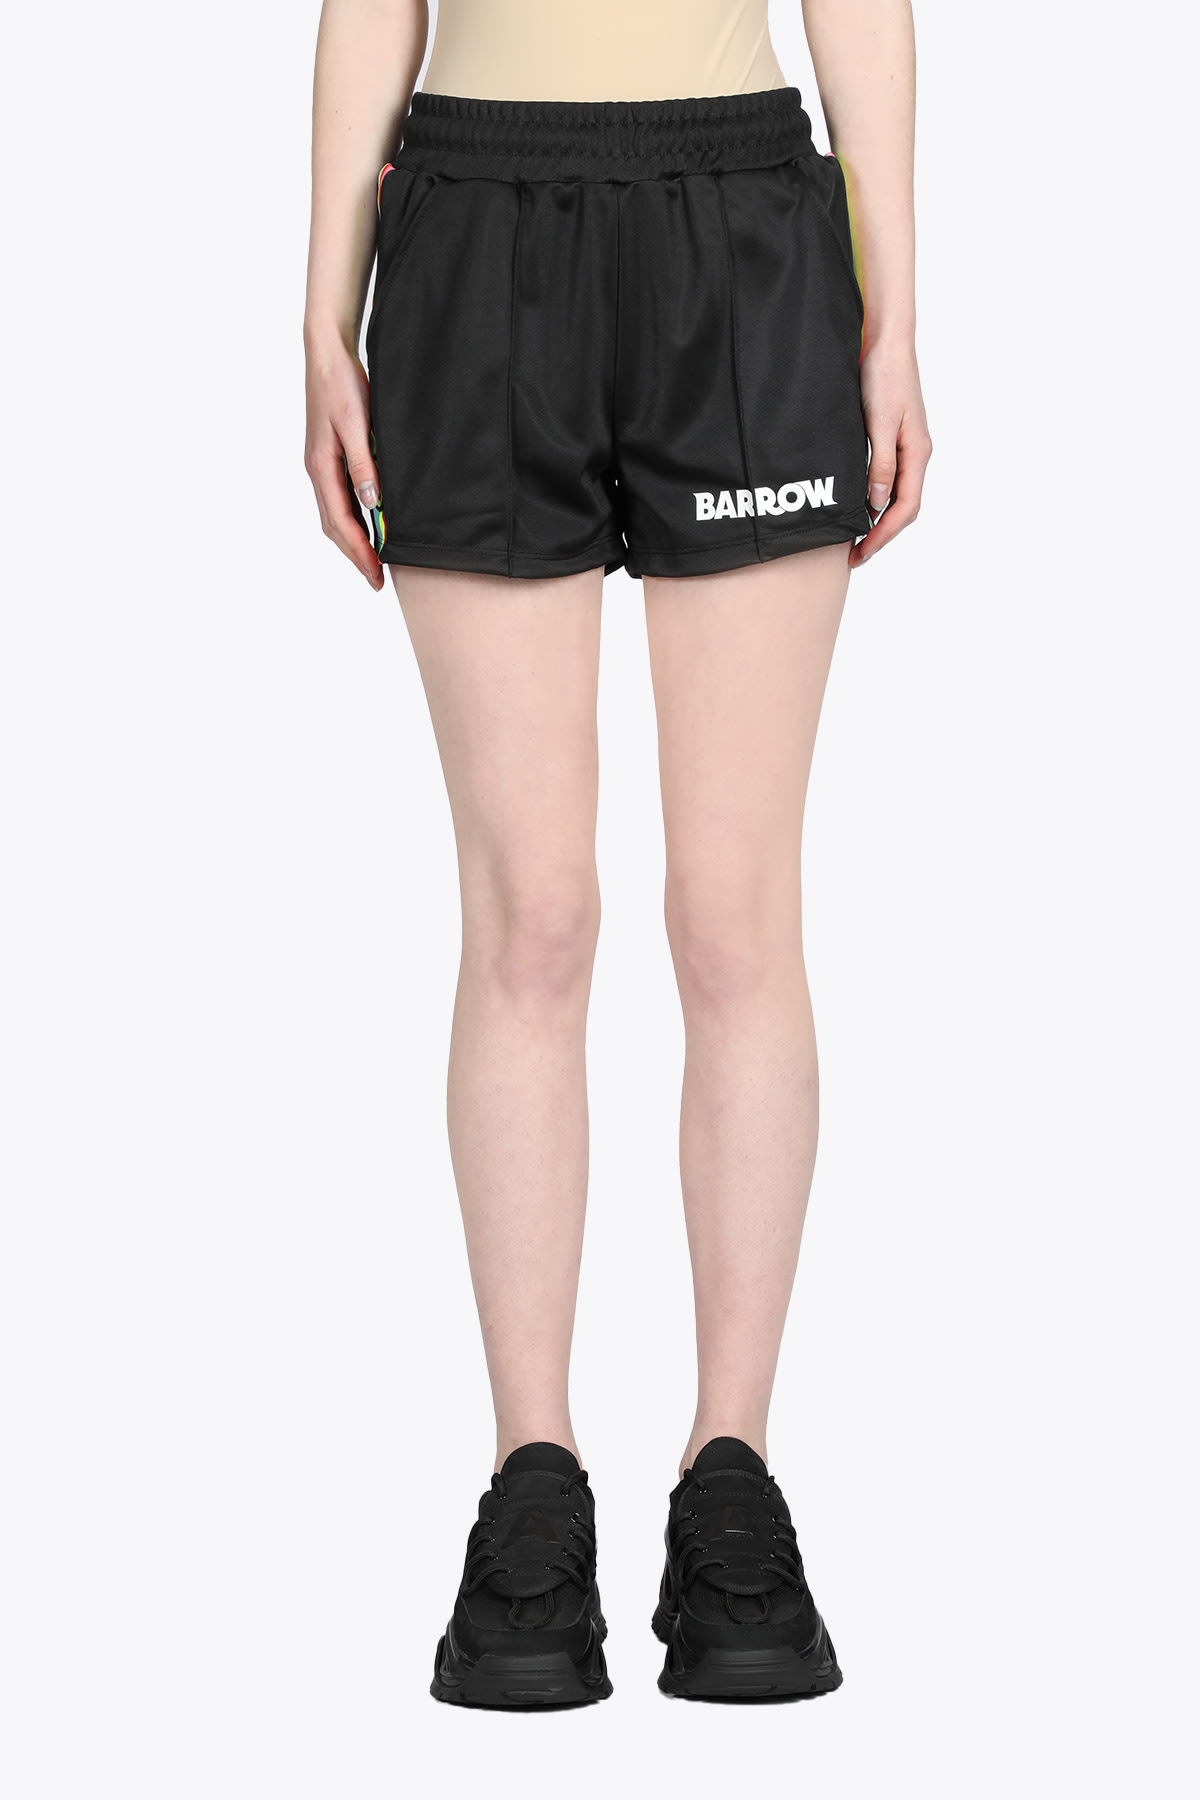 Barrow Triacetate Shorts Woman Black tracksuit shorts with multicolor side tape